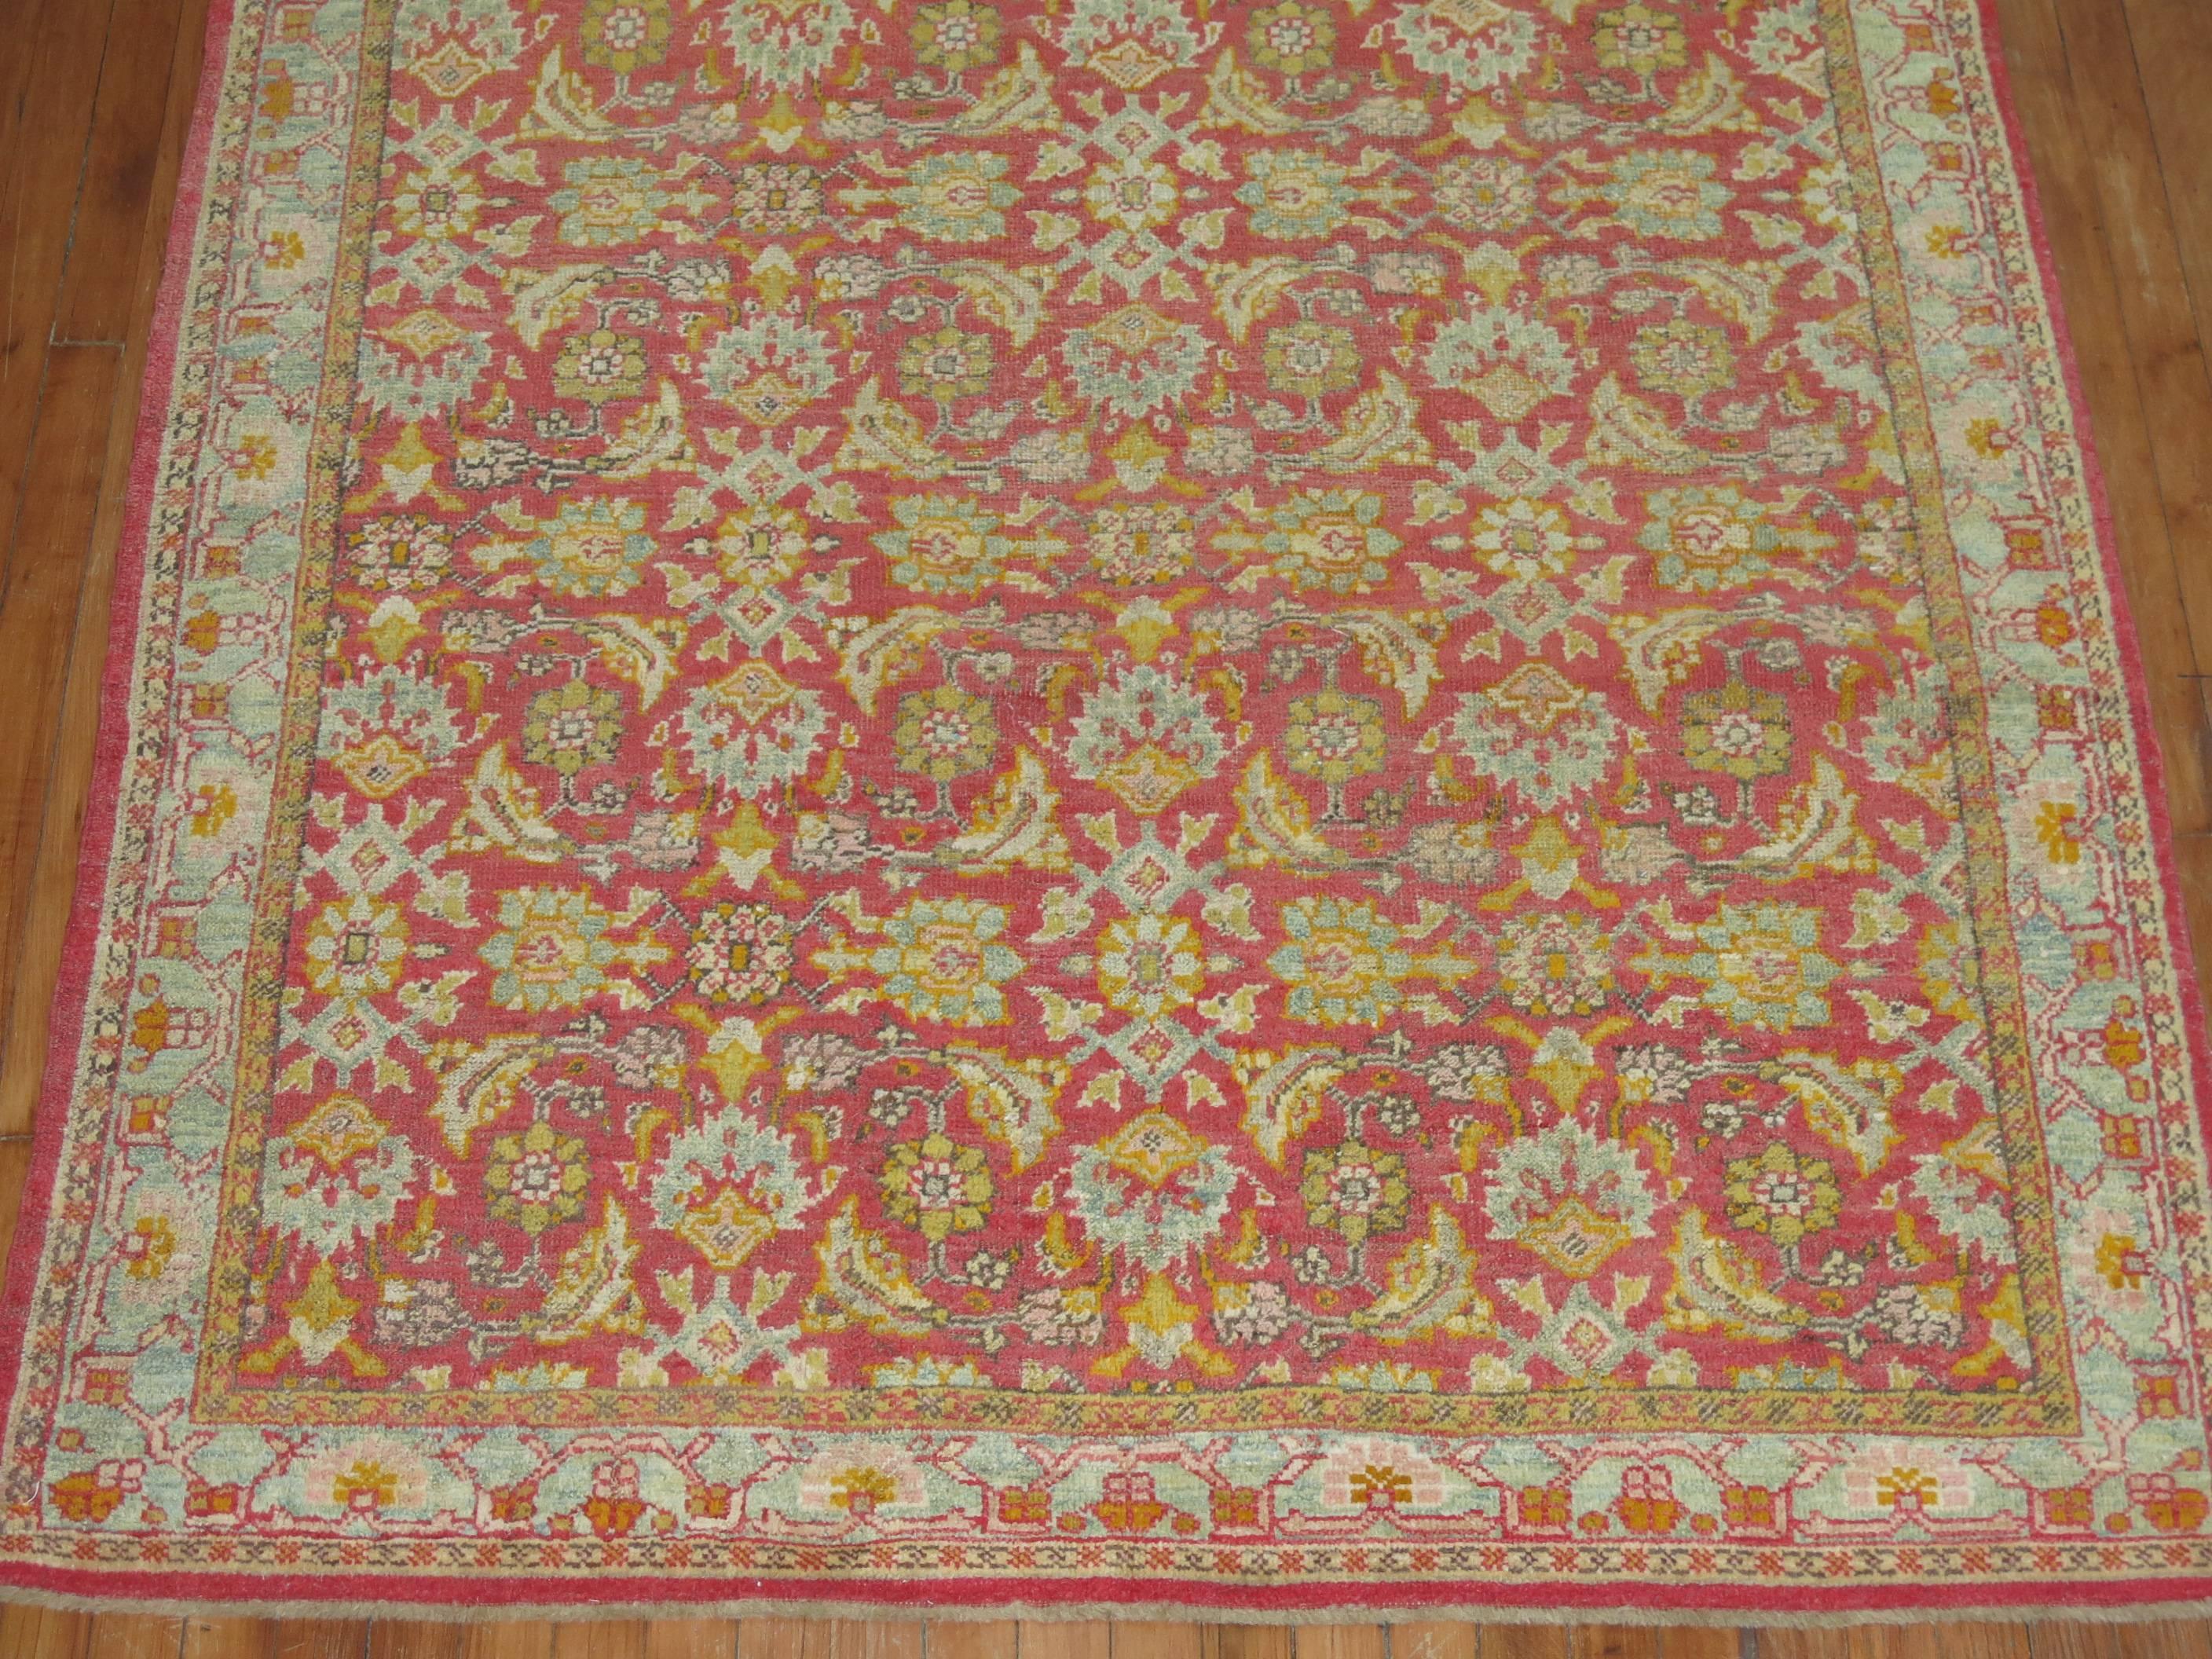 Zabihi Collection Antique Turkish Kula Carpet In Good Condition For Sale In New York, NY